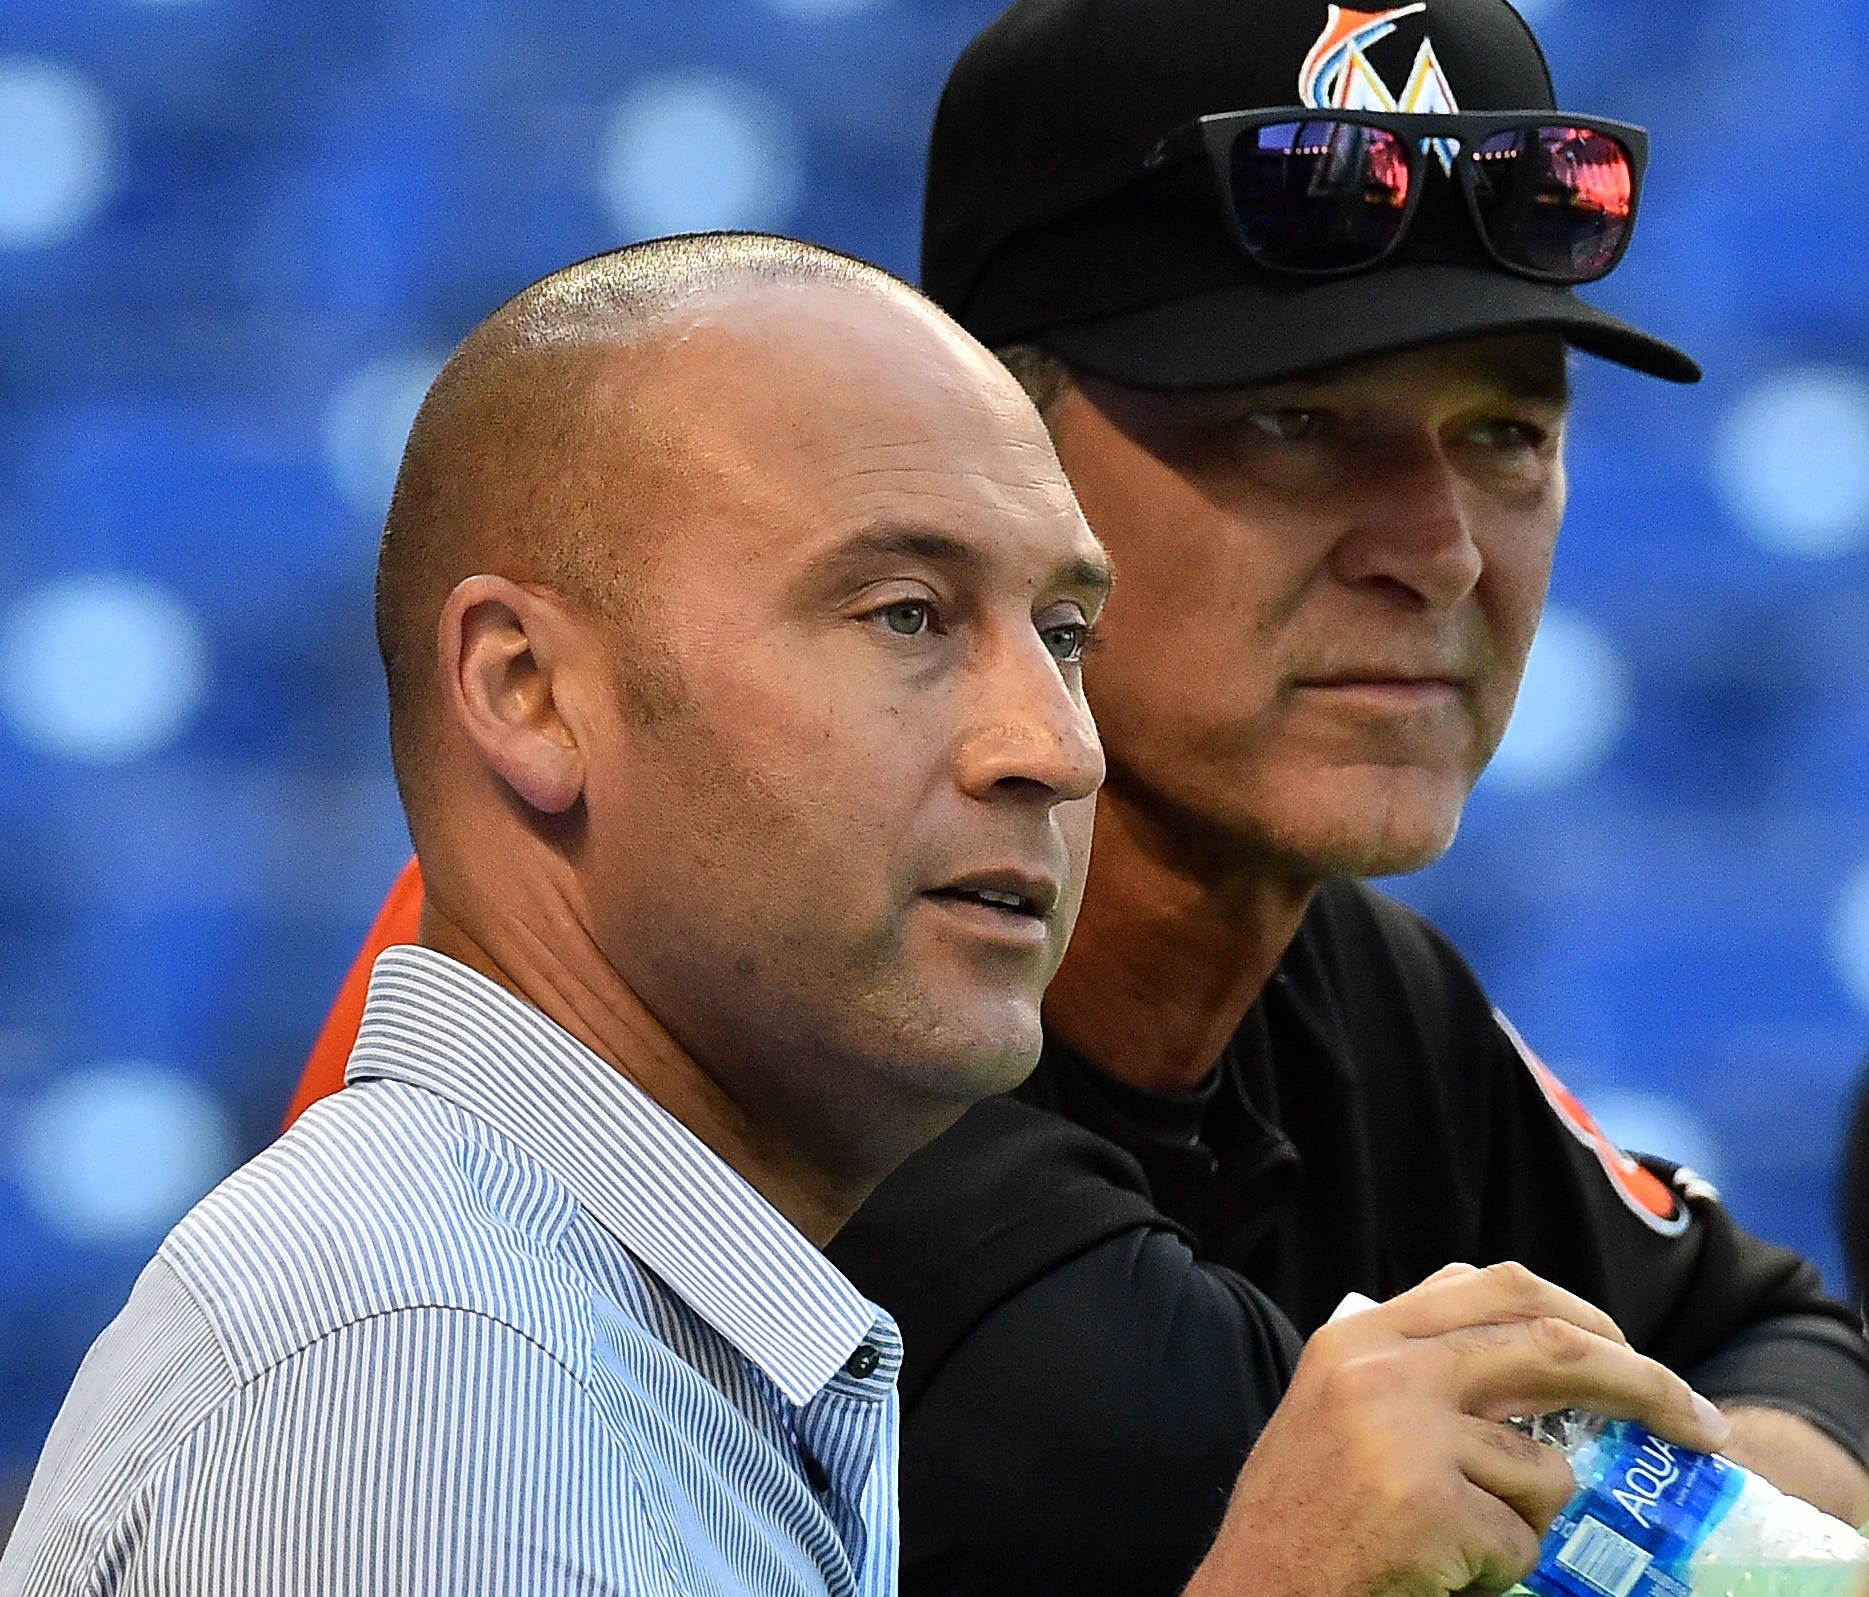 The Marlins are last in the NL East under CEO Derek Jeter (right) and manager Don Mattingly.